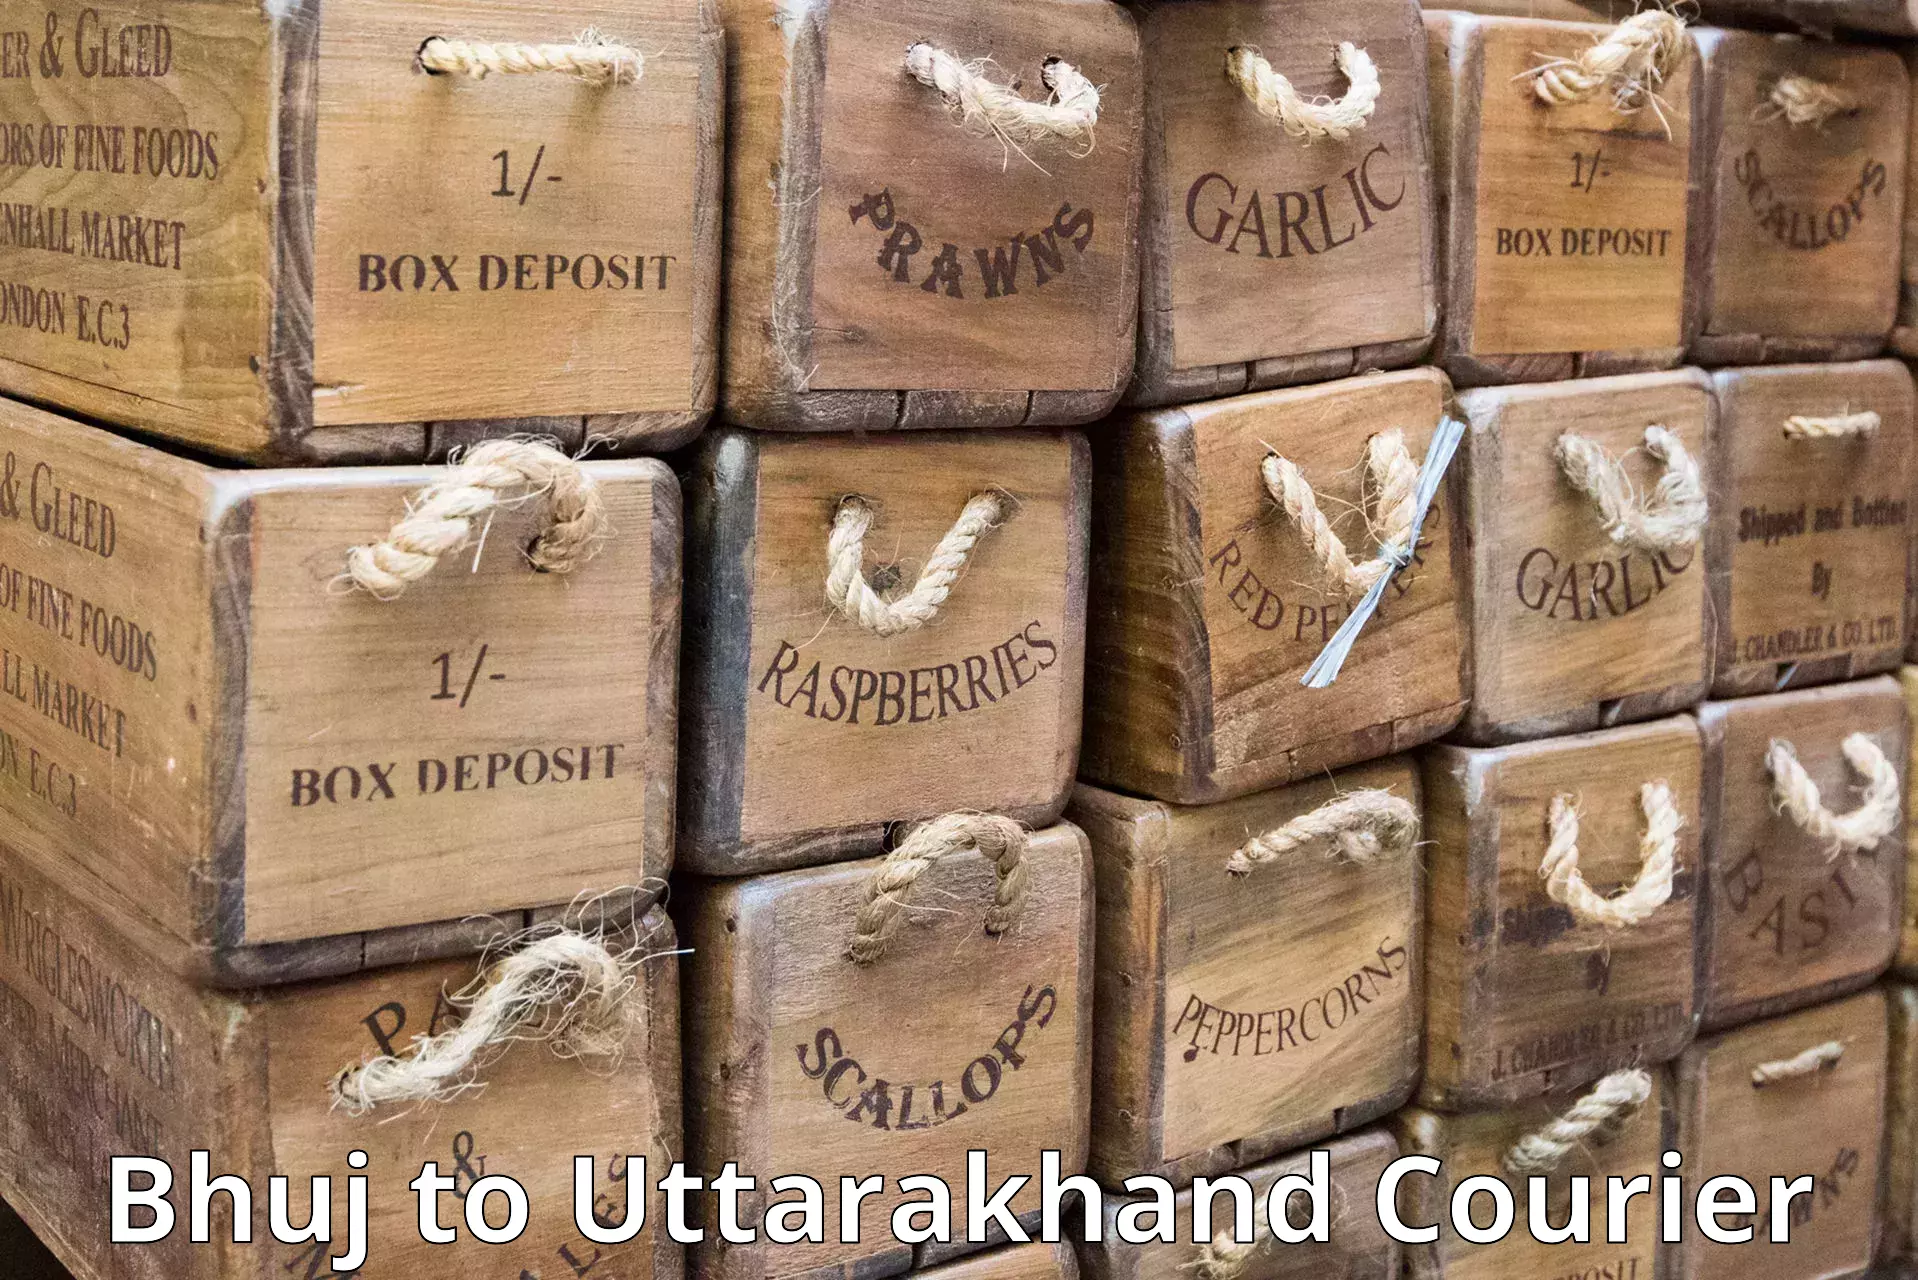 High-capacity parcel service Bhuj to Roorkee